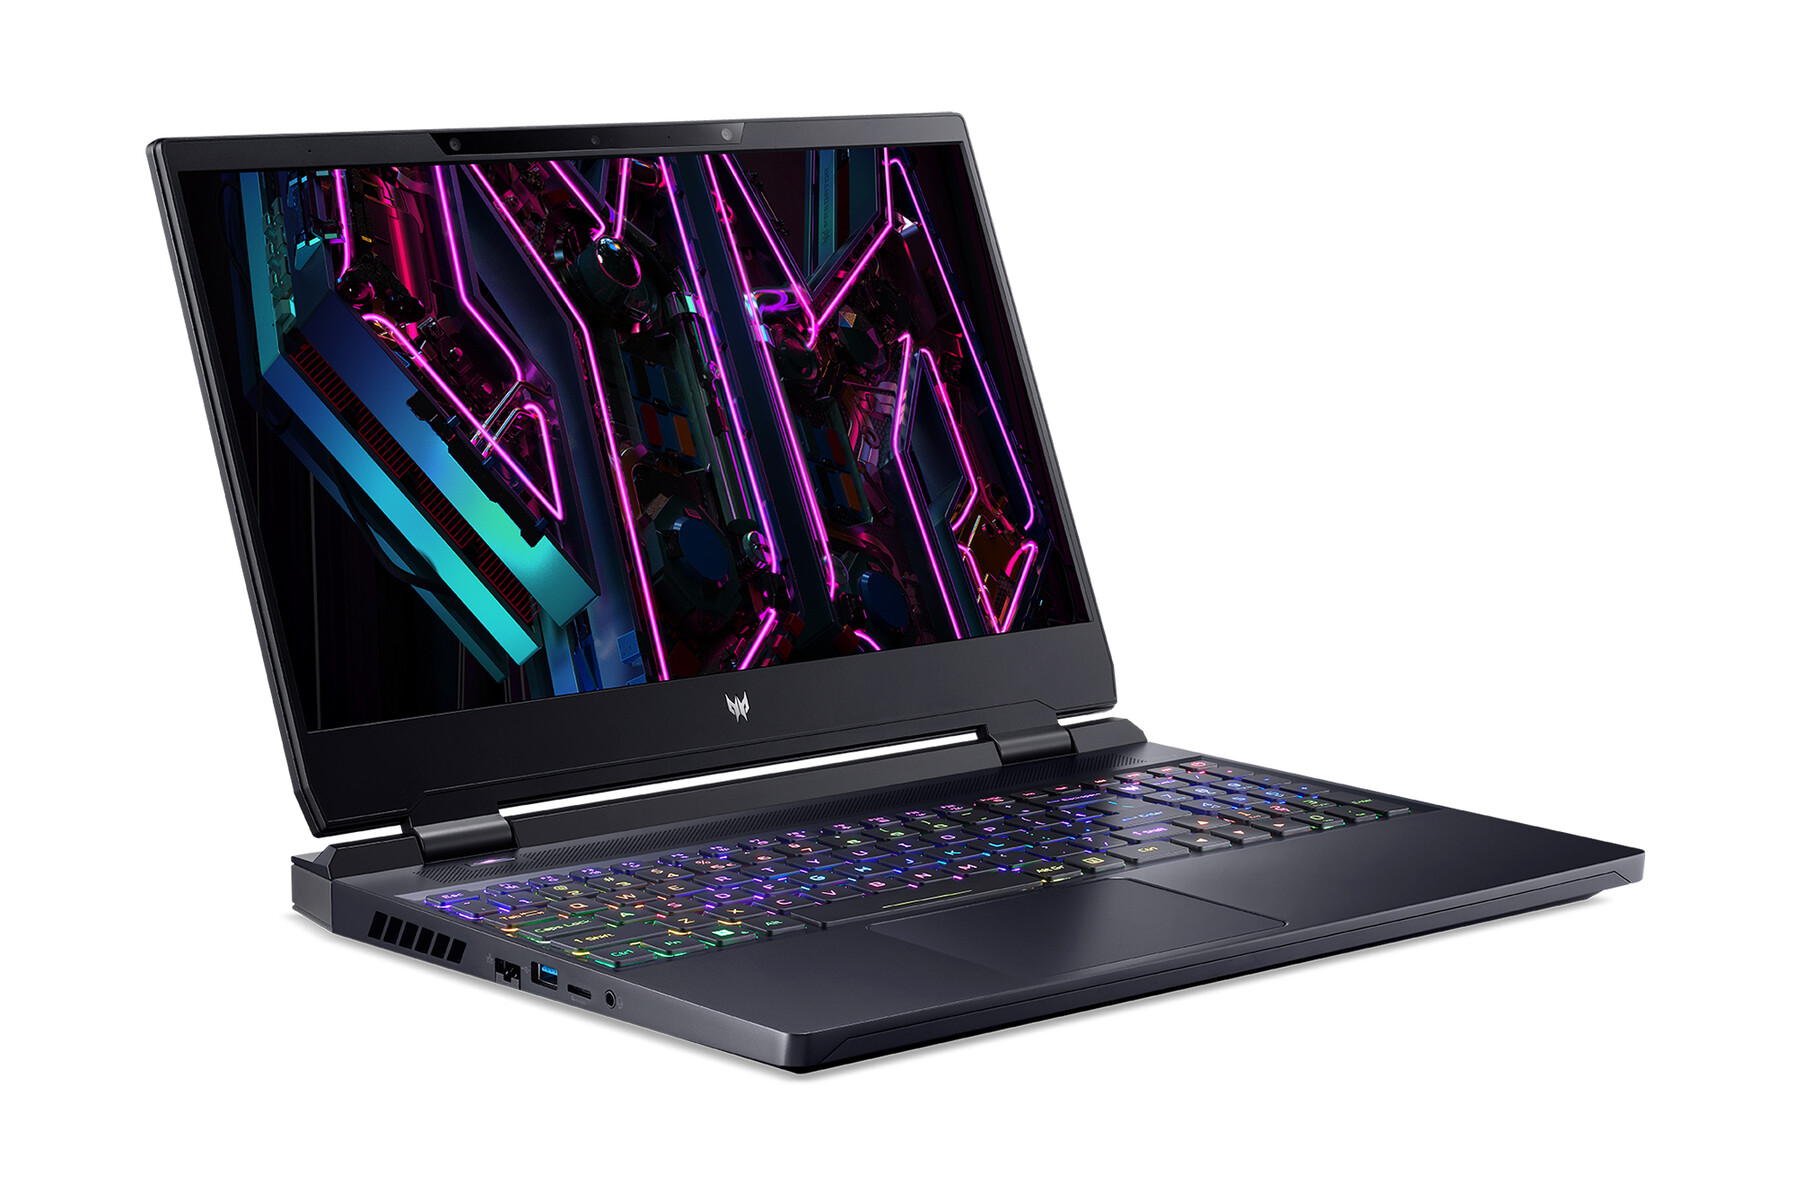 Acer Predator Helios 3D 15 SpatialLabs Edition debuts as new high-end  gaming laptop with 3D effect display - NotebookCheck.net News